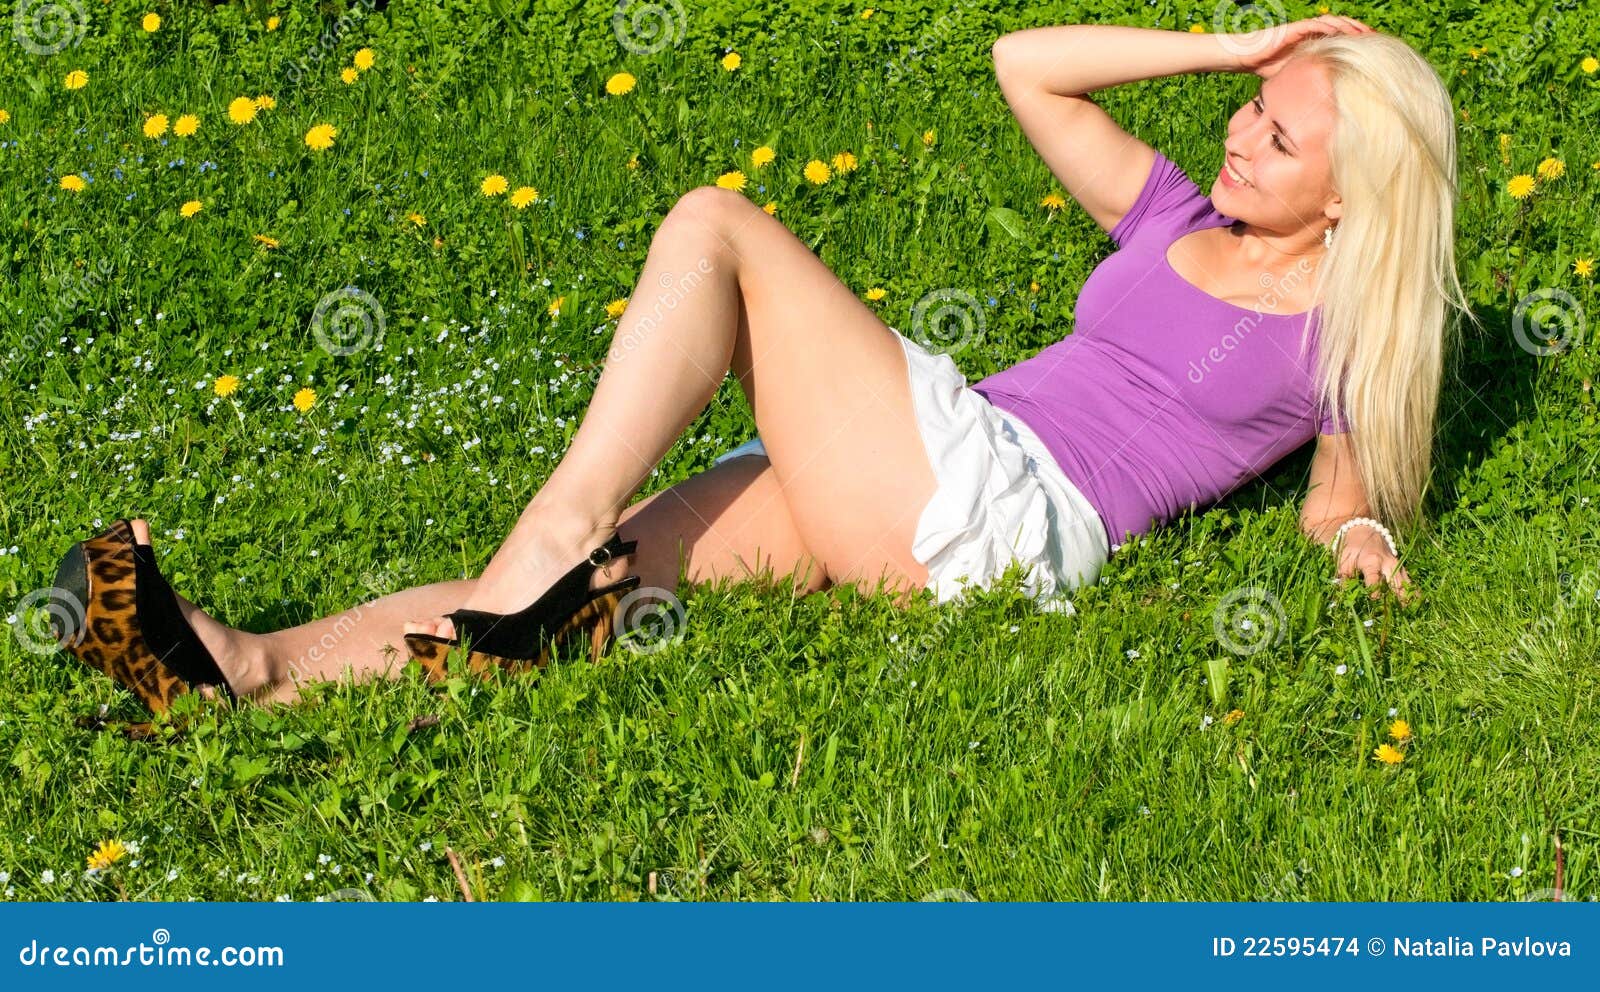 stock images girl